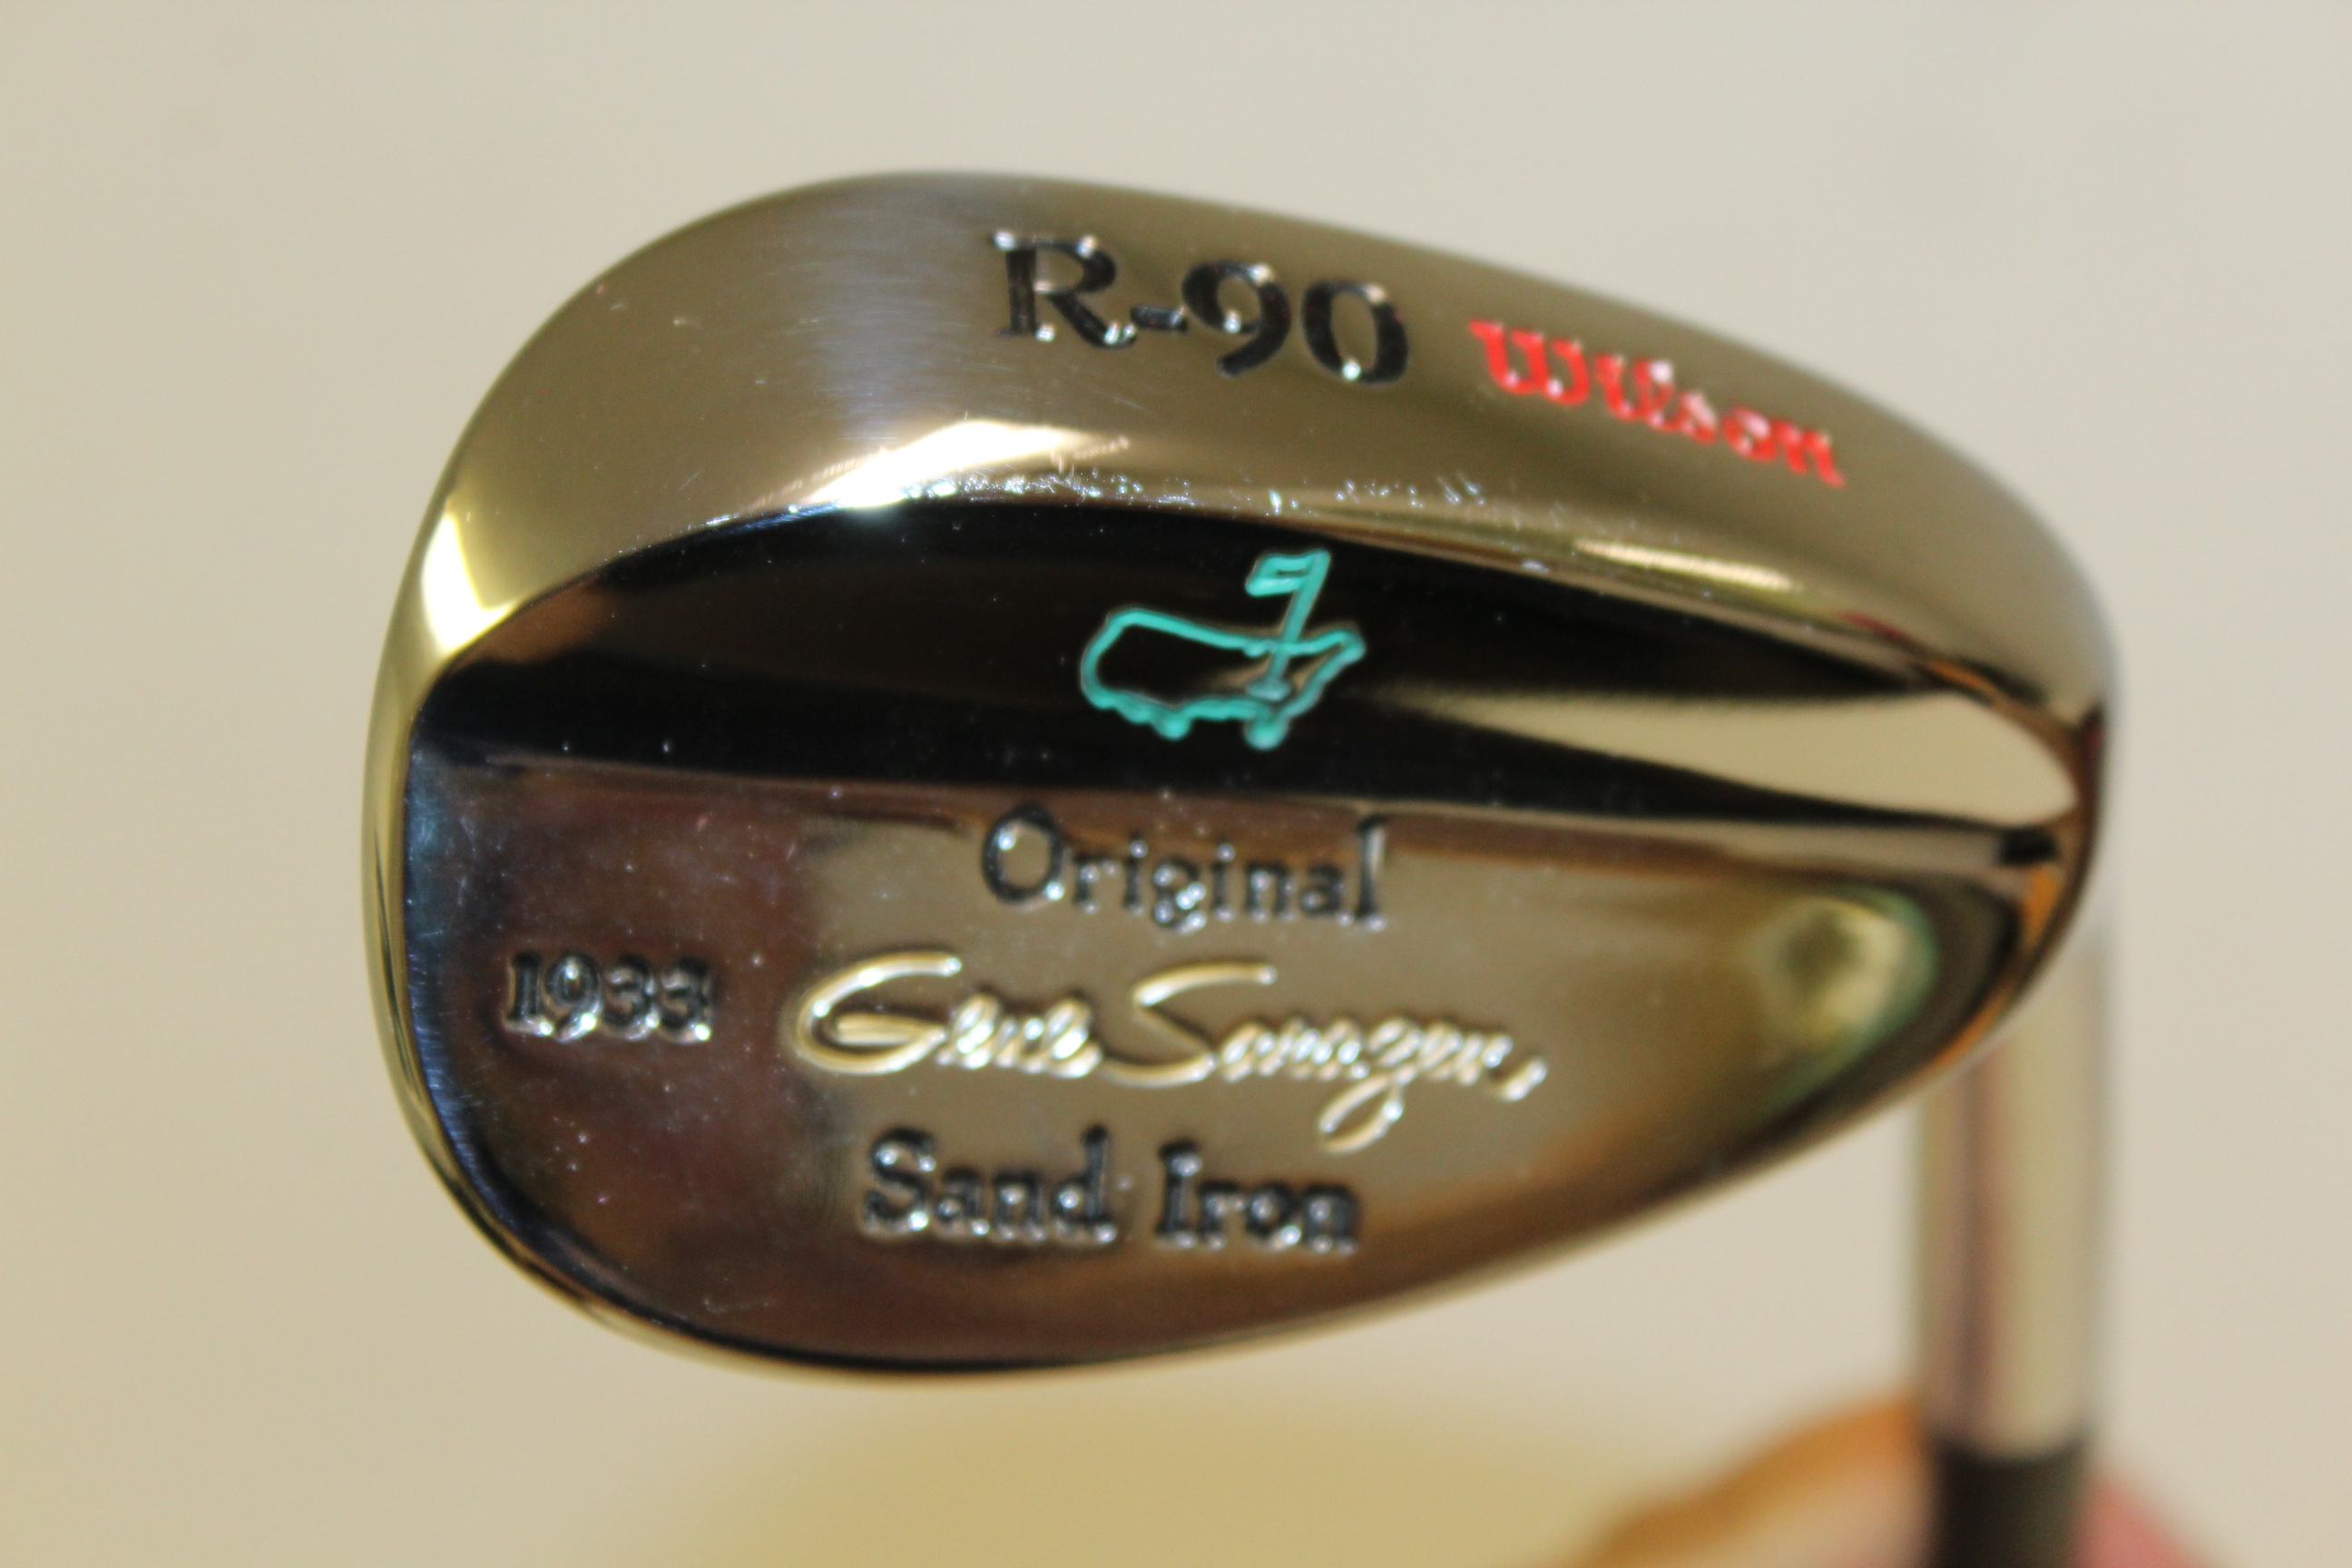 Tour pro's 30-year-old wedge deemed non-conforming by USGA